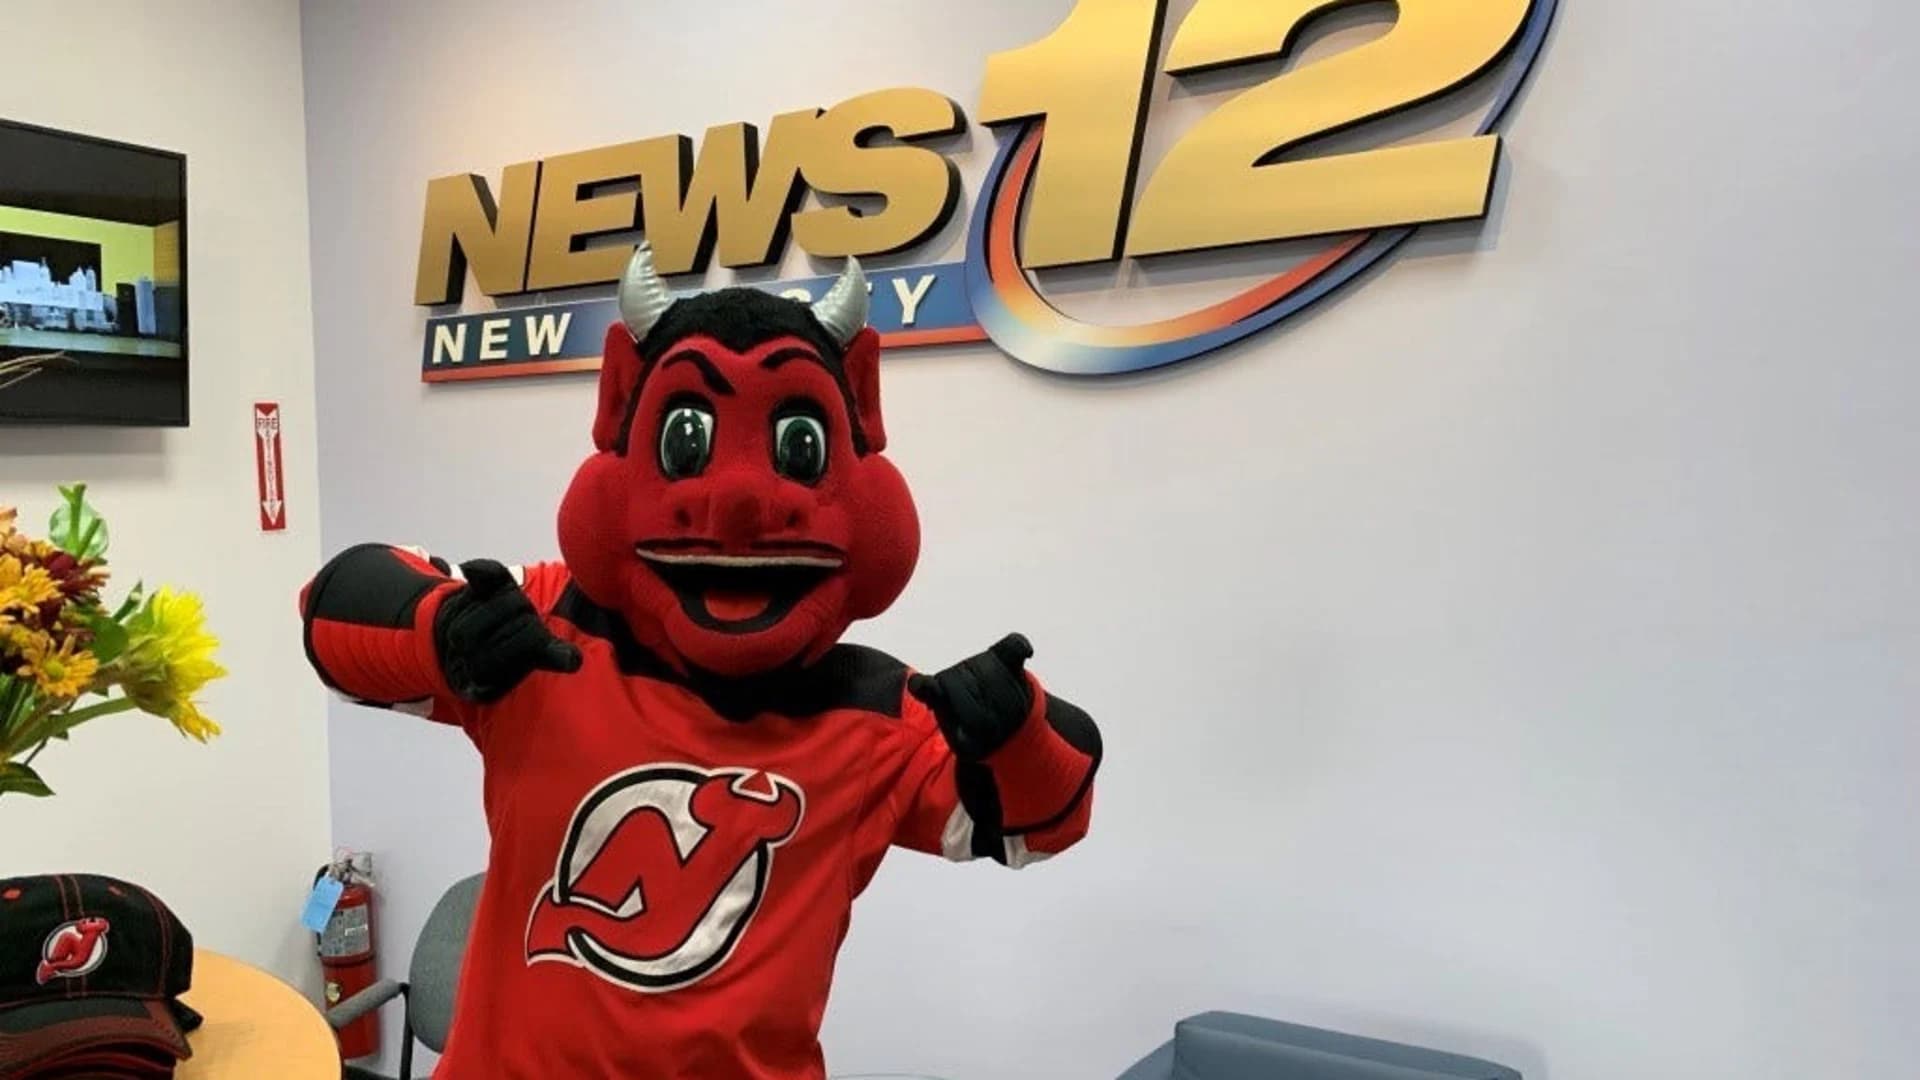 PHOTOS: New Jersey Devil stops by News 12